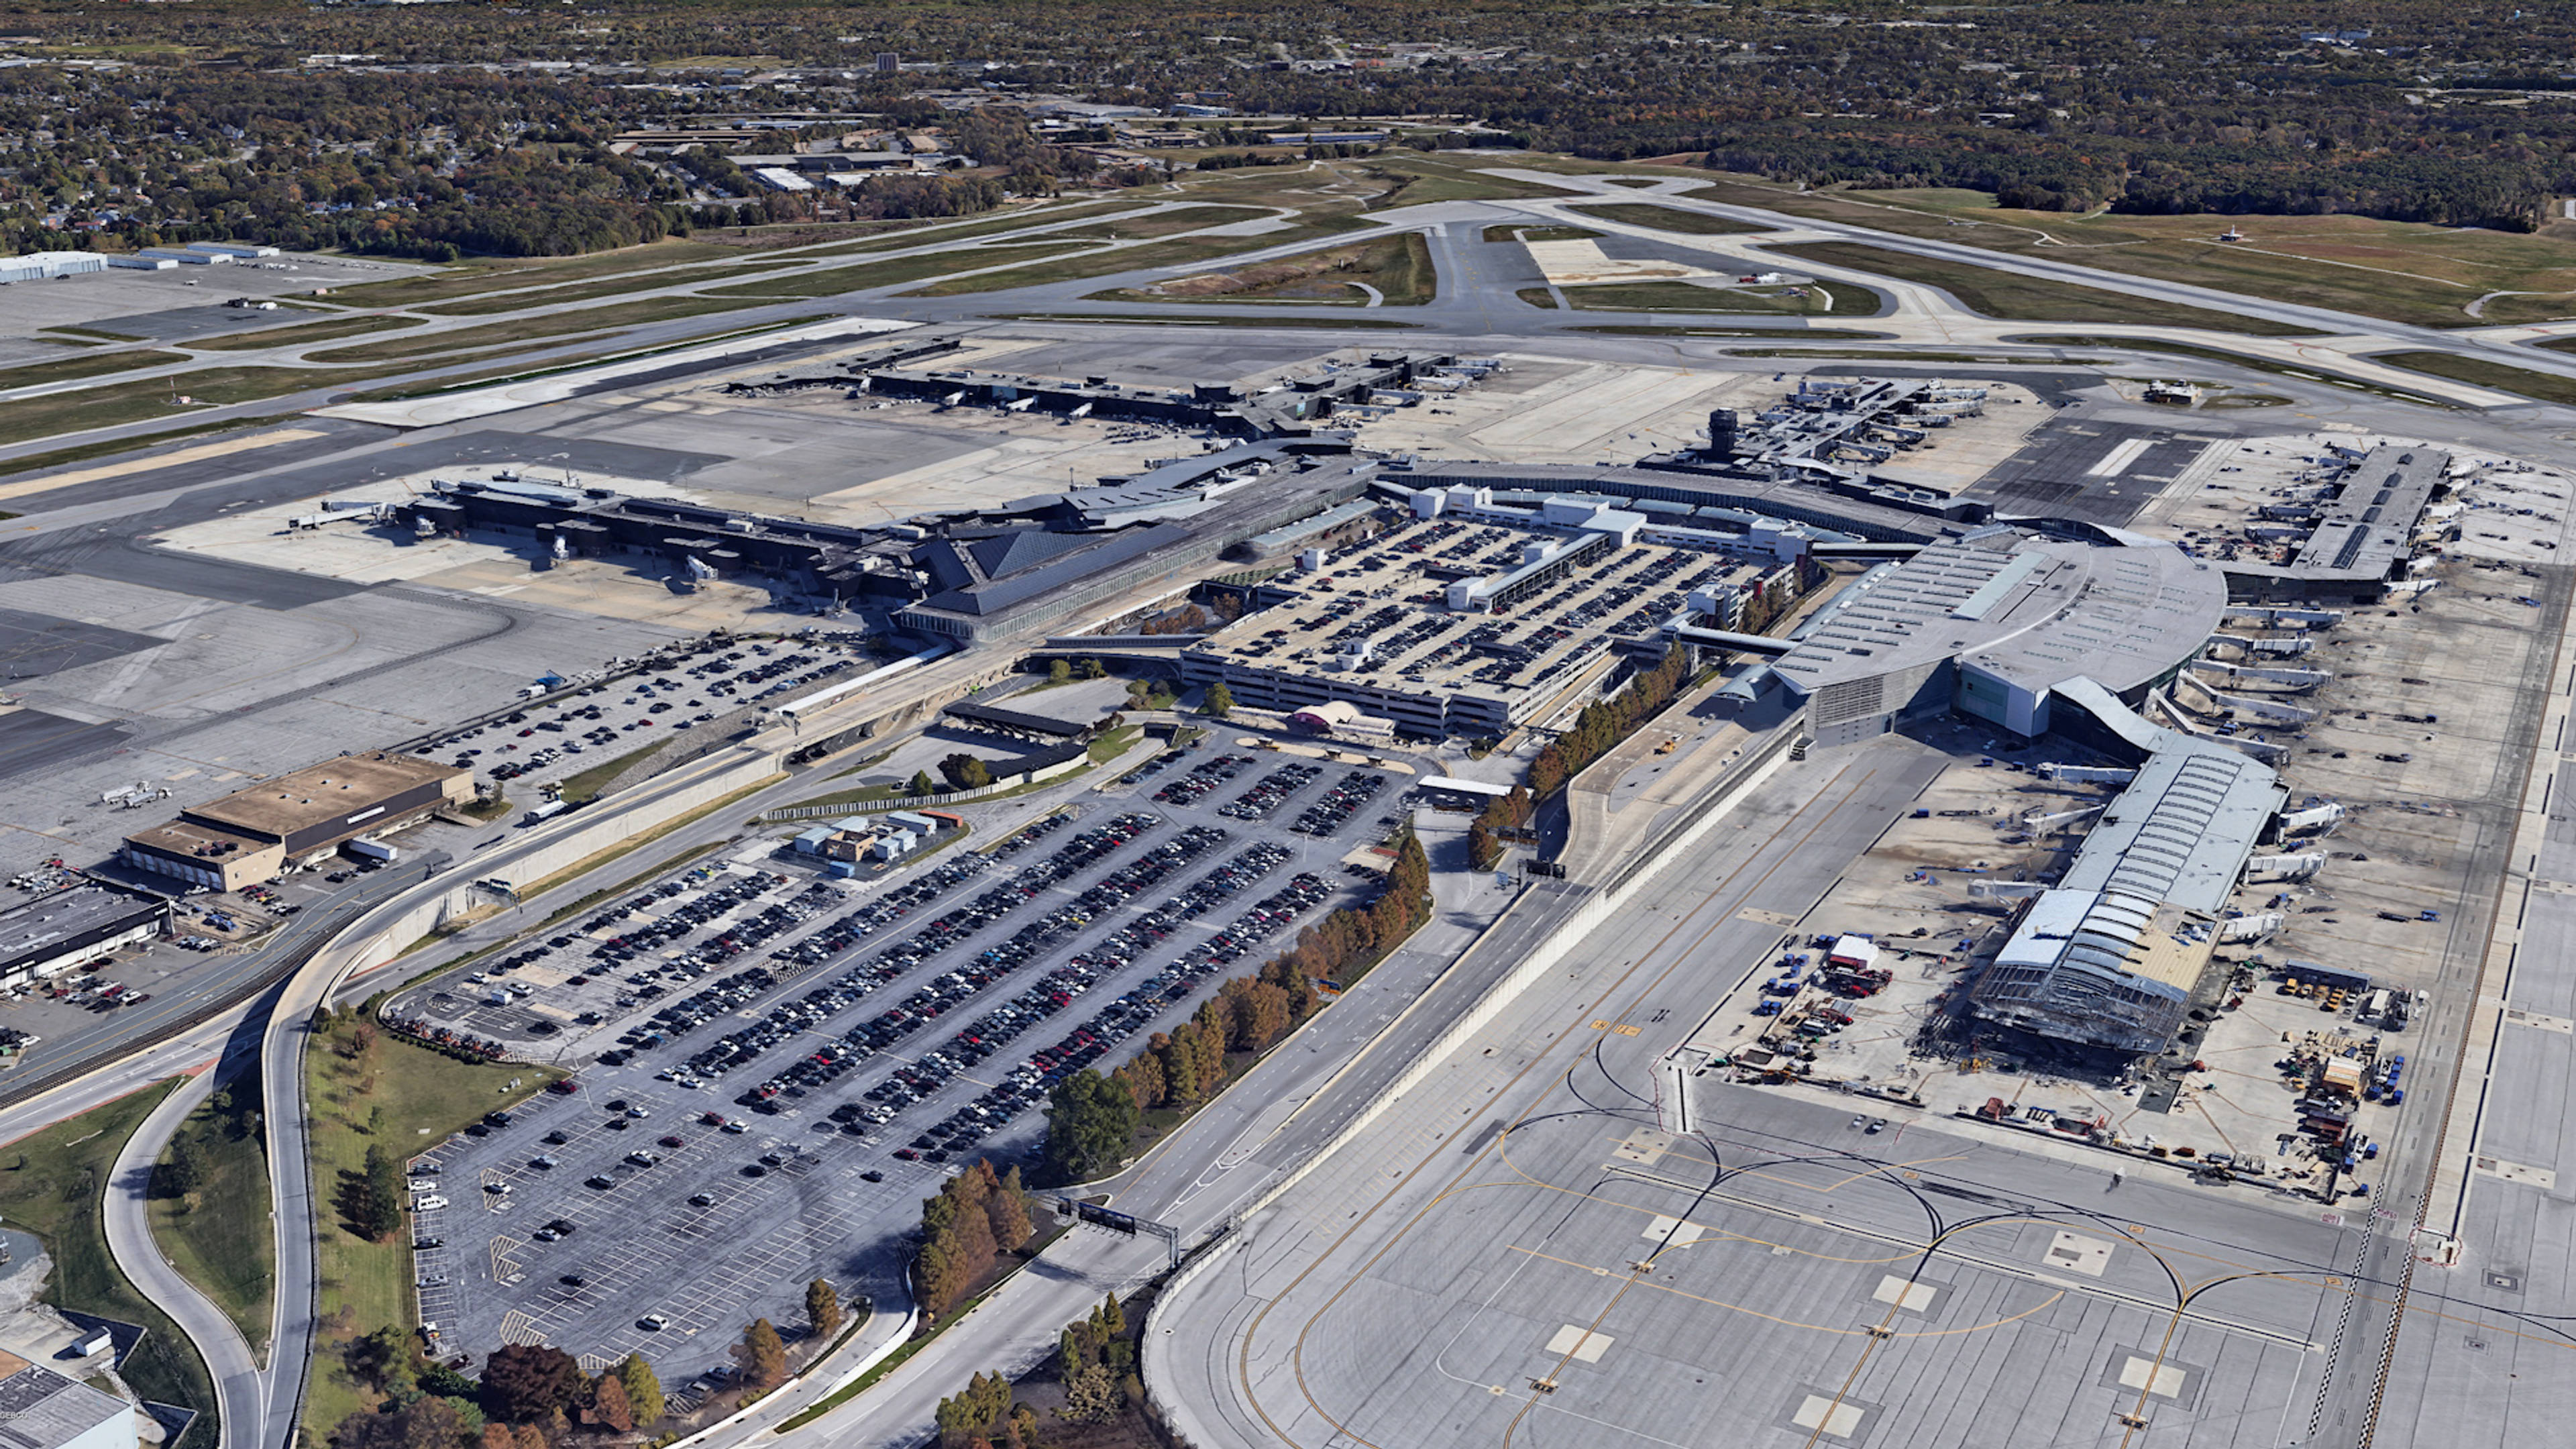  Aerial View of Baltimore Airport Parking